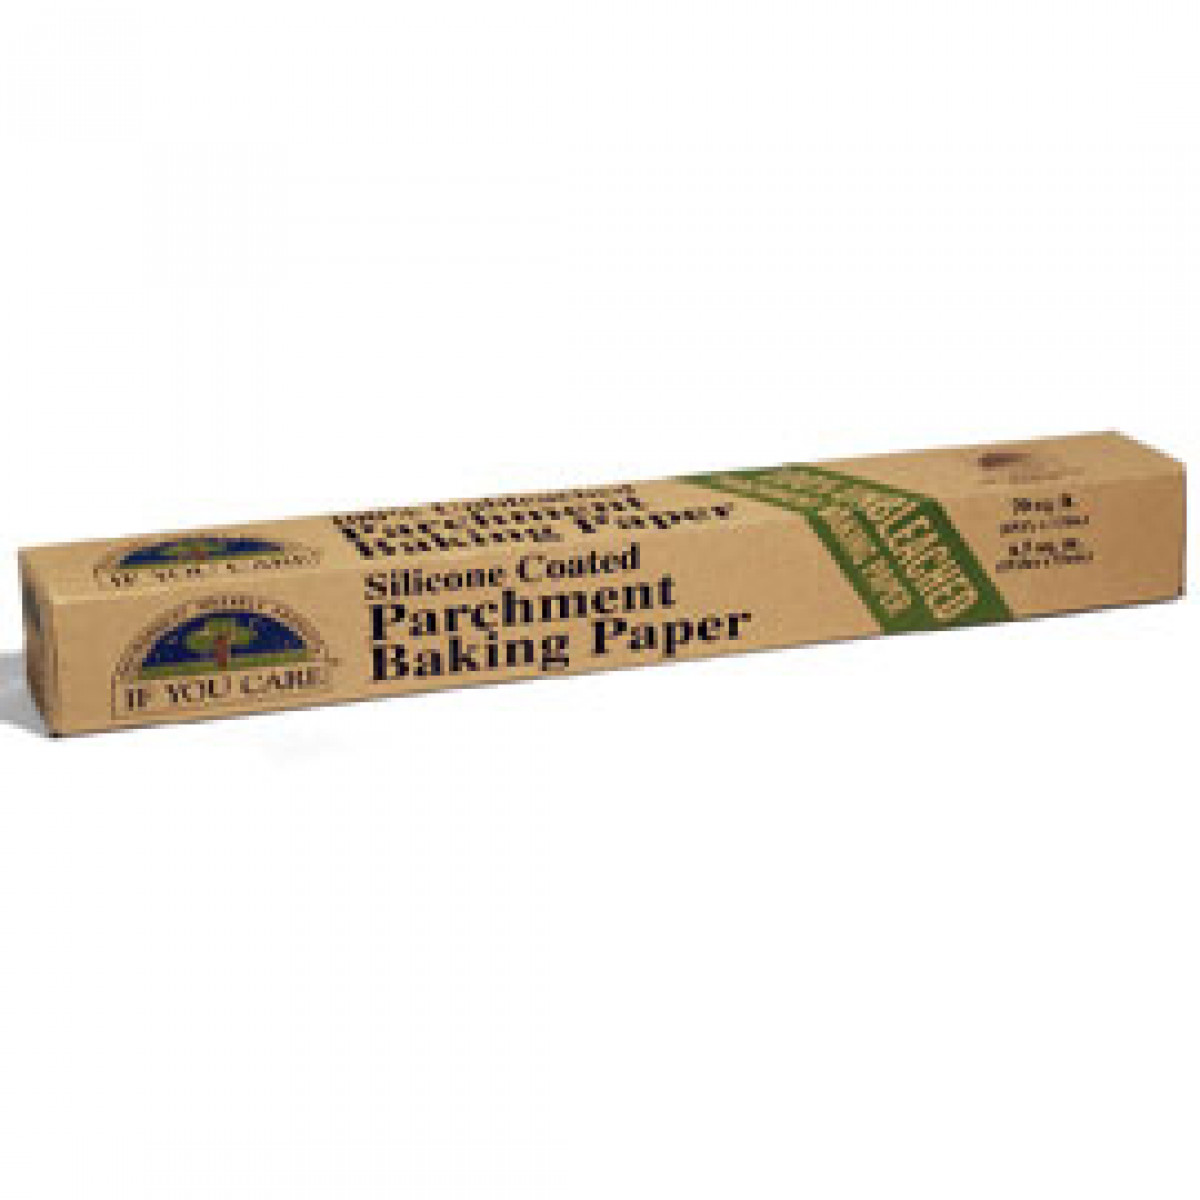 Product picture for Unbleached Parchment Baking Paper (Rolls)